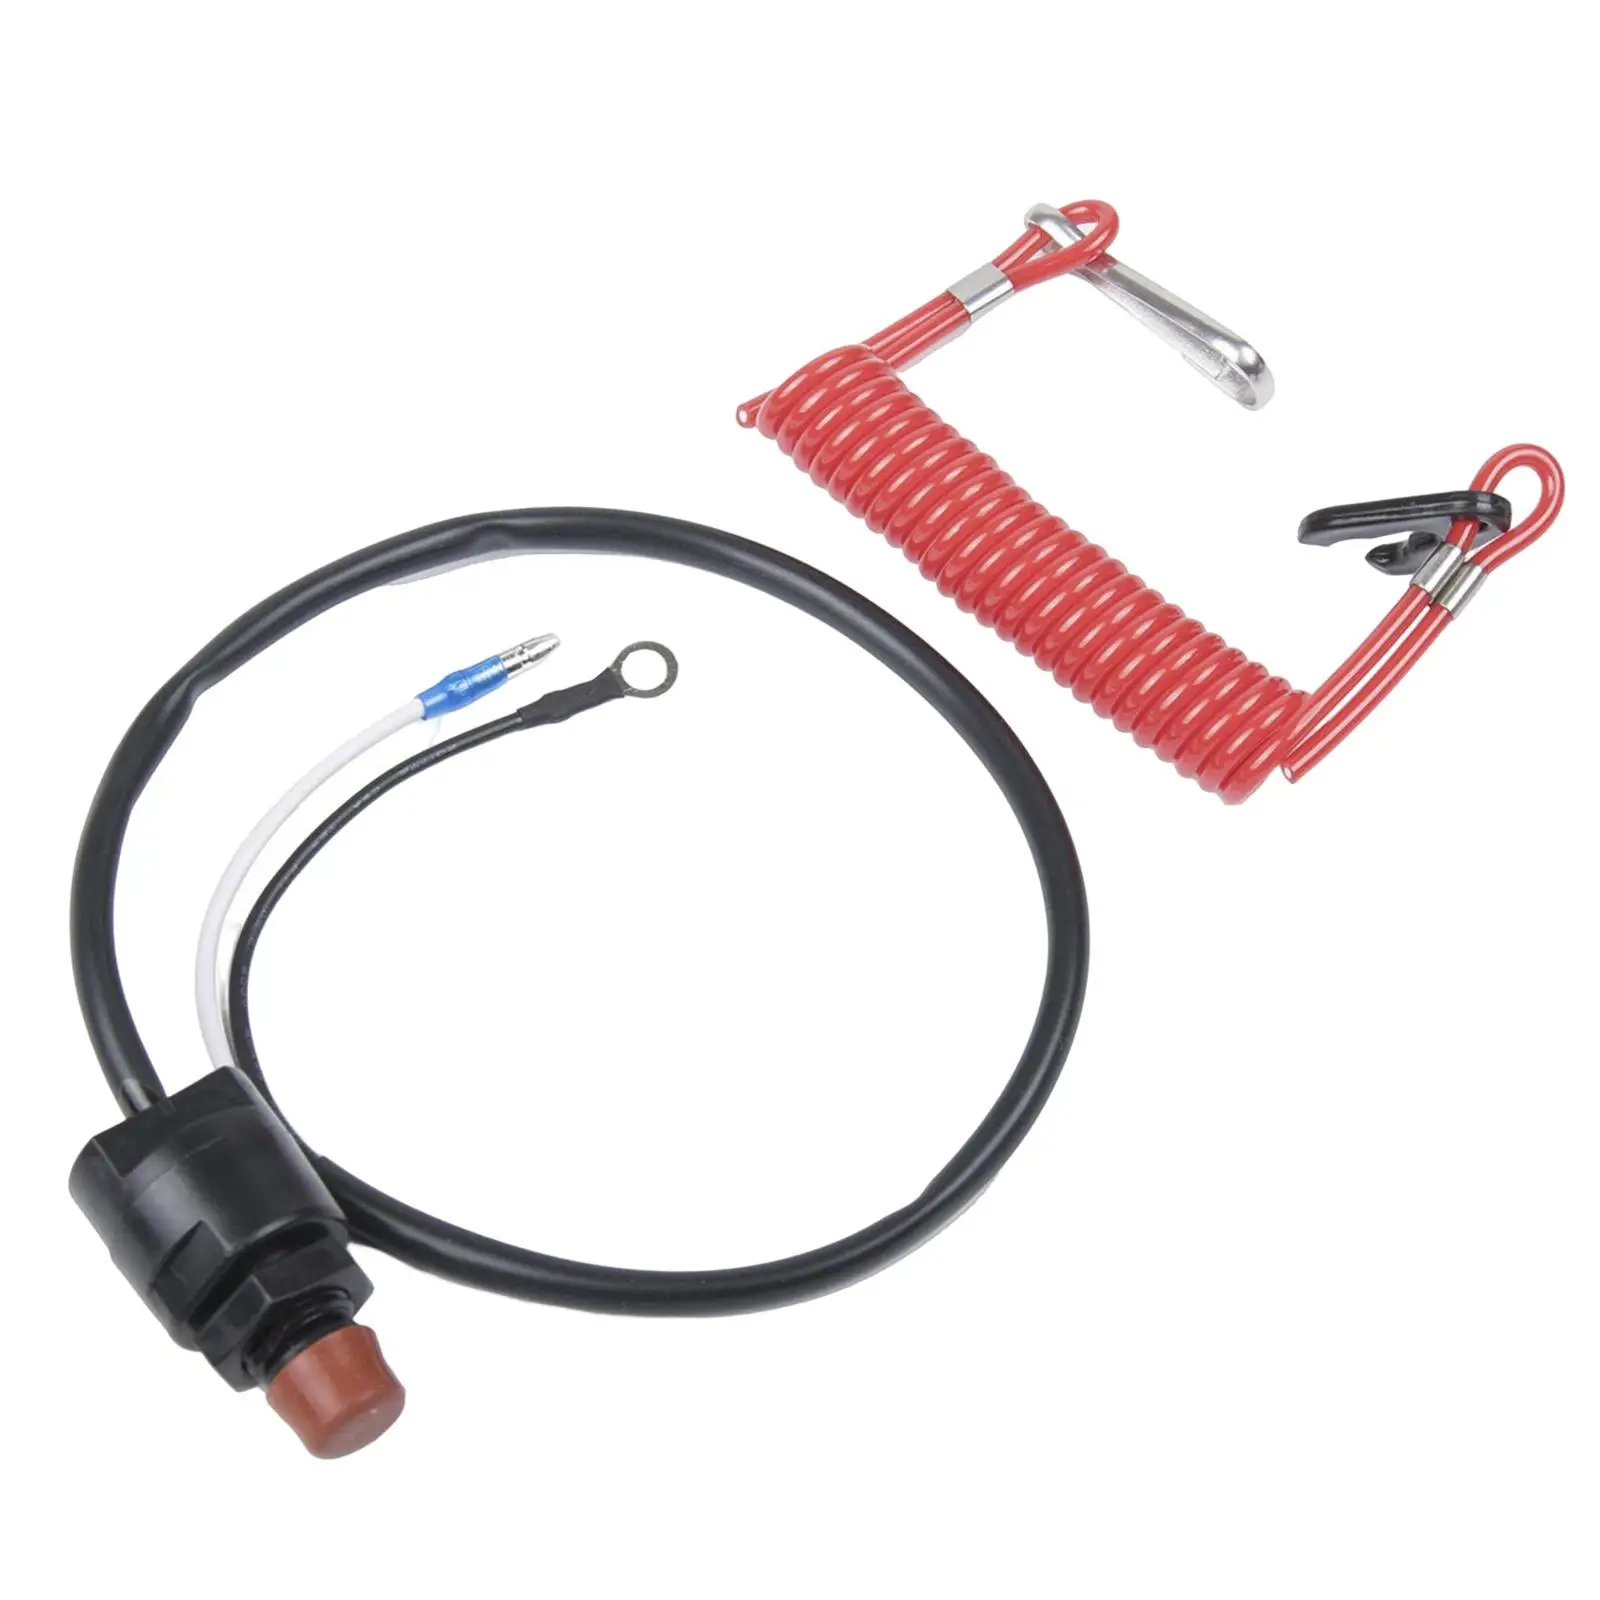 Engine Stop Kill Switch Cut Out Strap Cord Suit Key Lanyard Safety Tether Lanyard Flameout Switch for Boat Outboard Motor